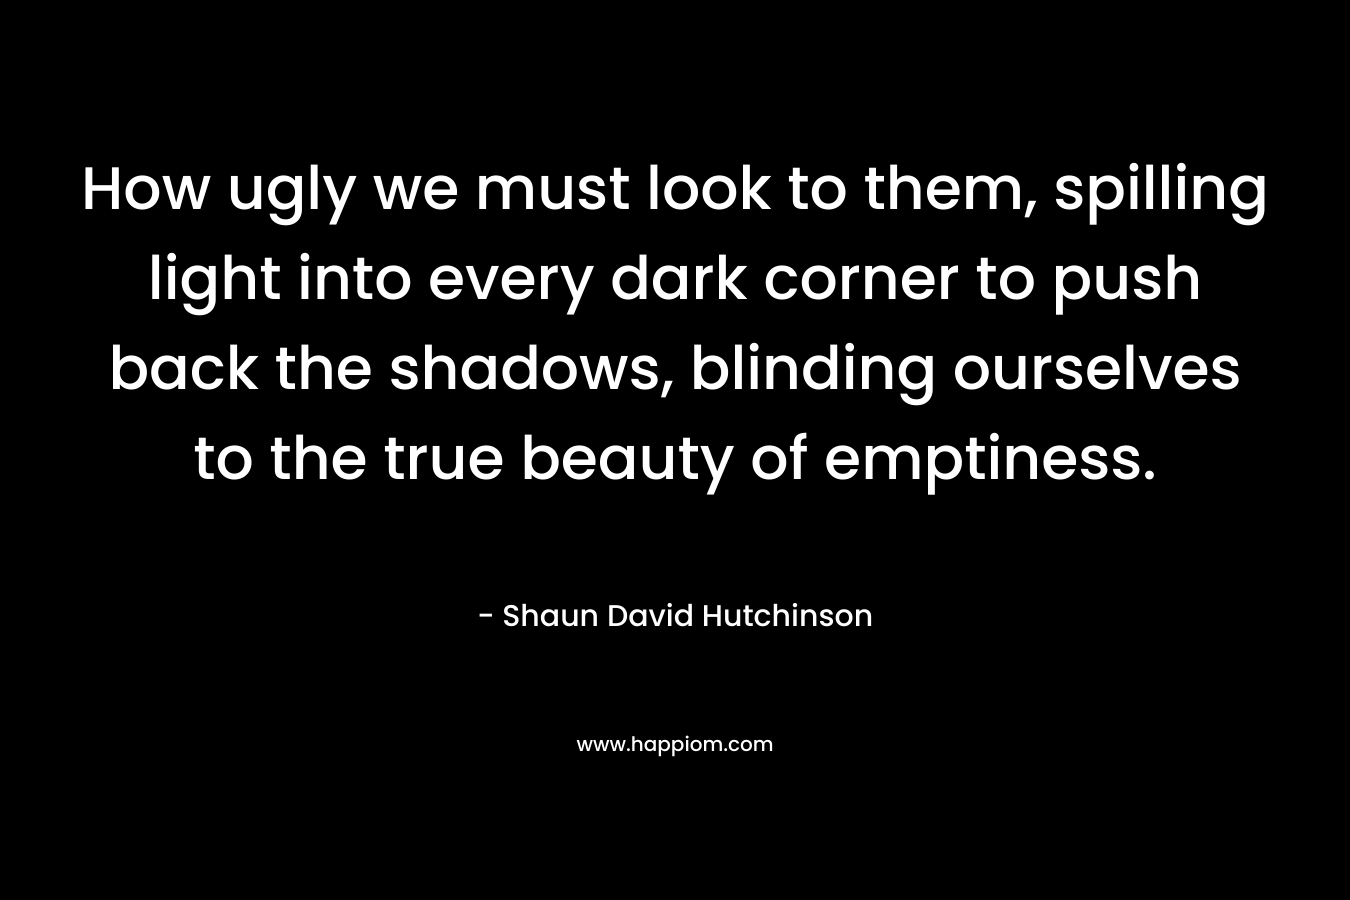 How ugly we must look to them, spilling light into every dark corner to push back the shadows, blinding ourselves to the true beauty of emptiness.